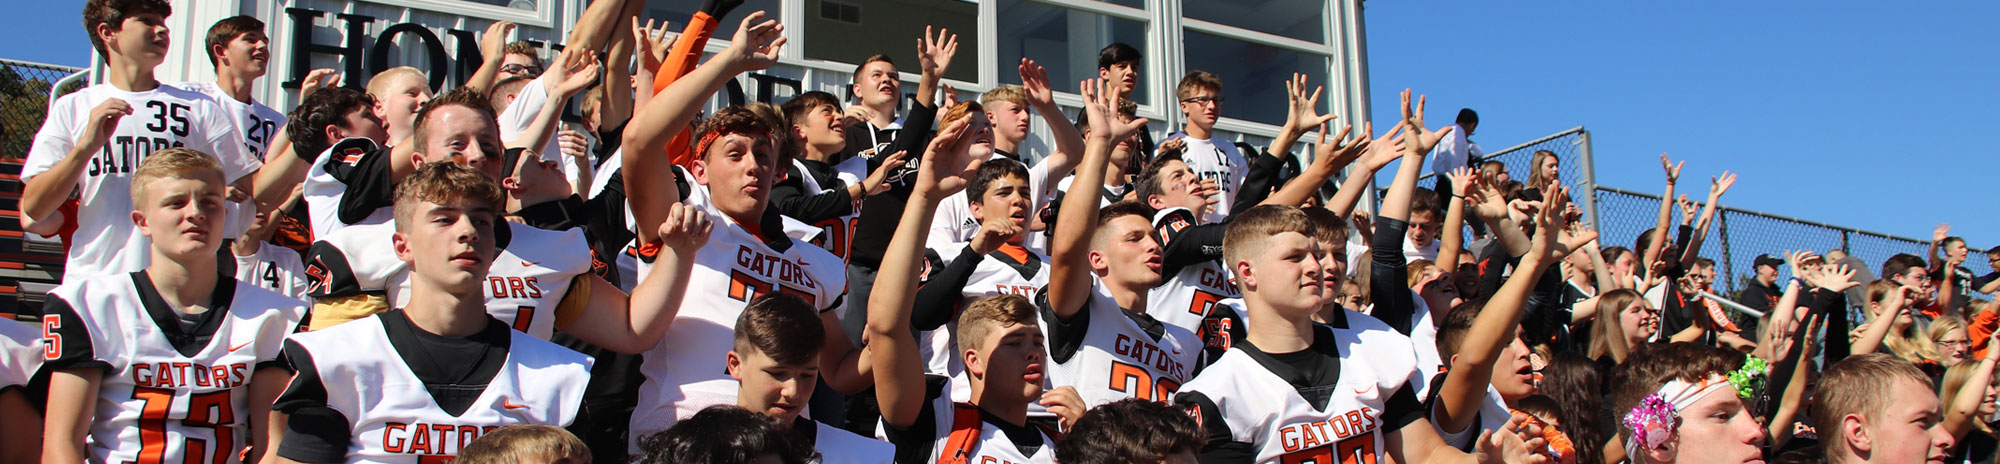 Port Allegany football players cheering in the stands